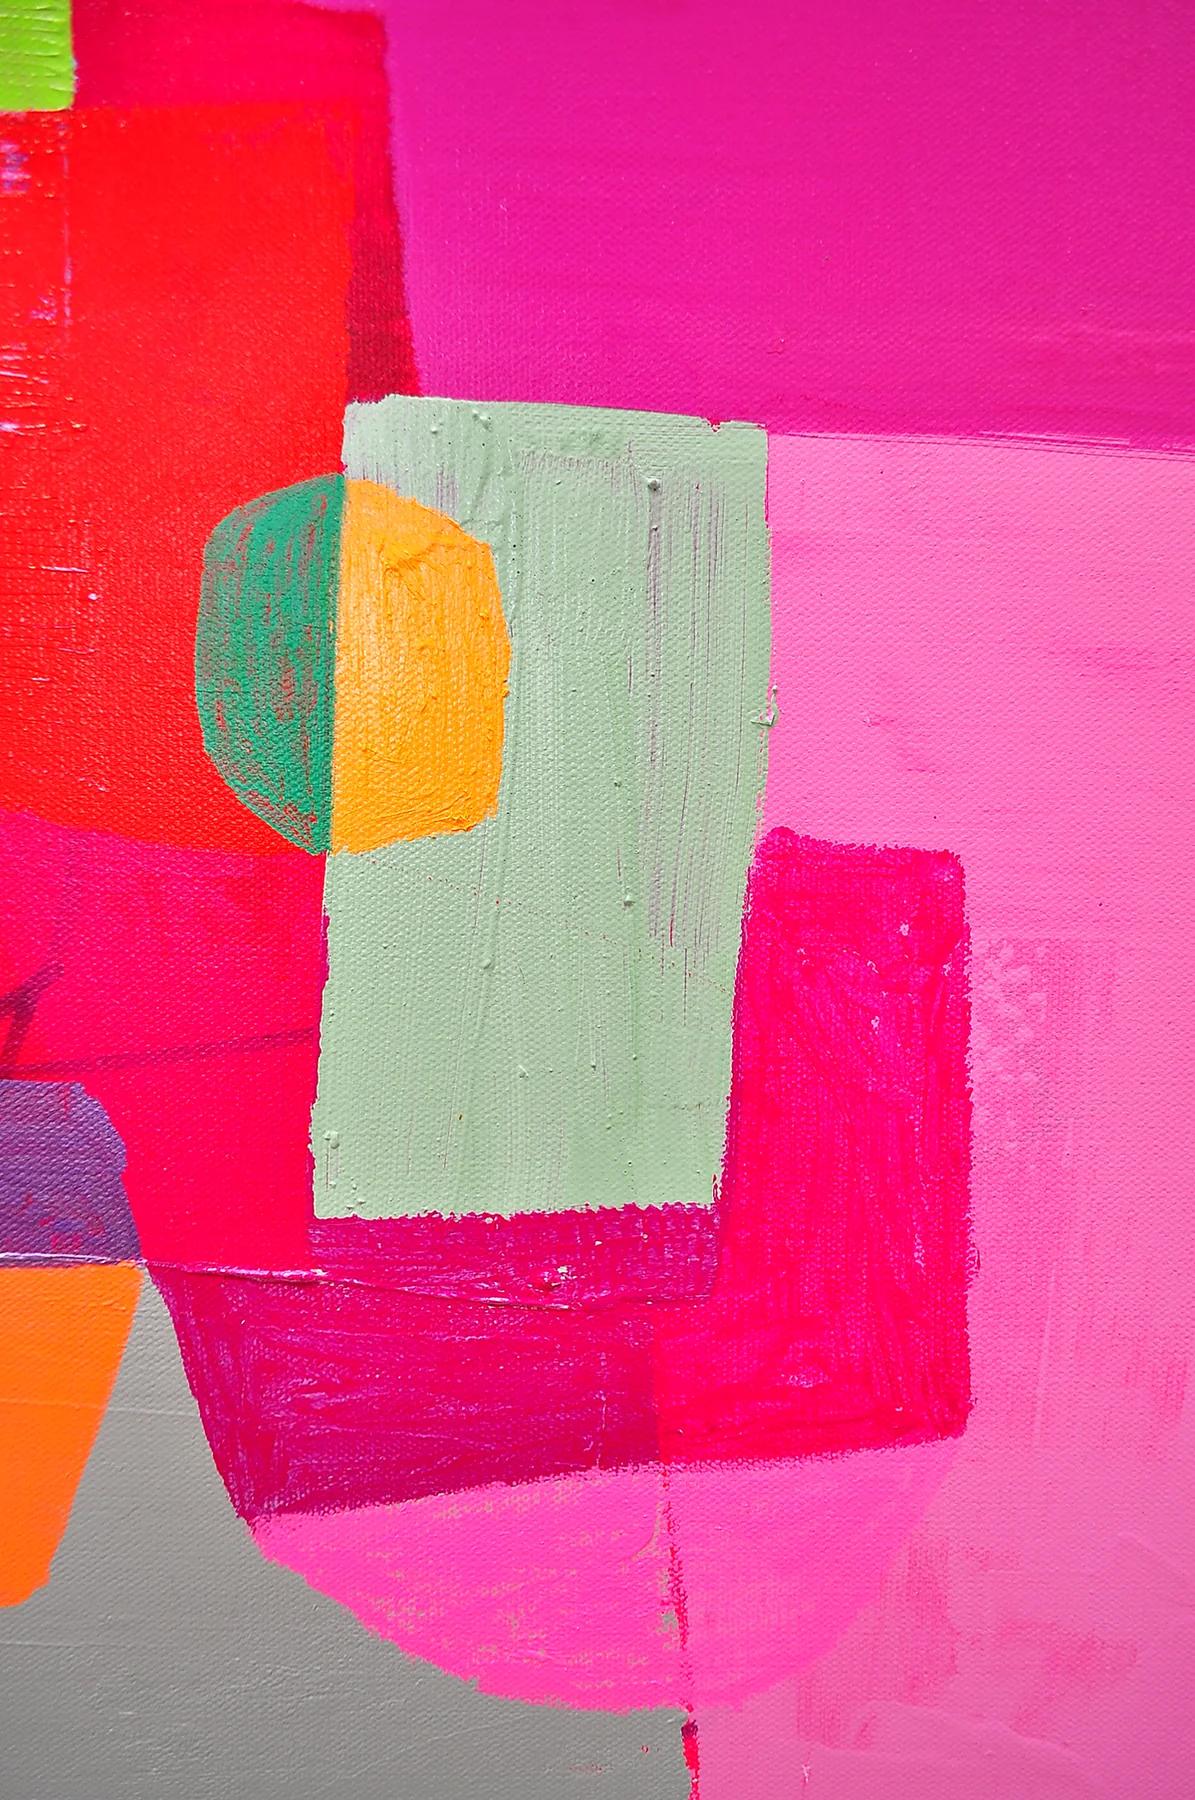 Parachute - Pink Abstract Painting by Marianne Angeli Rodriguez